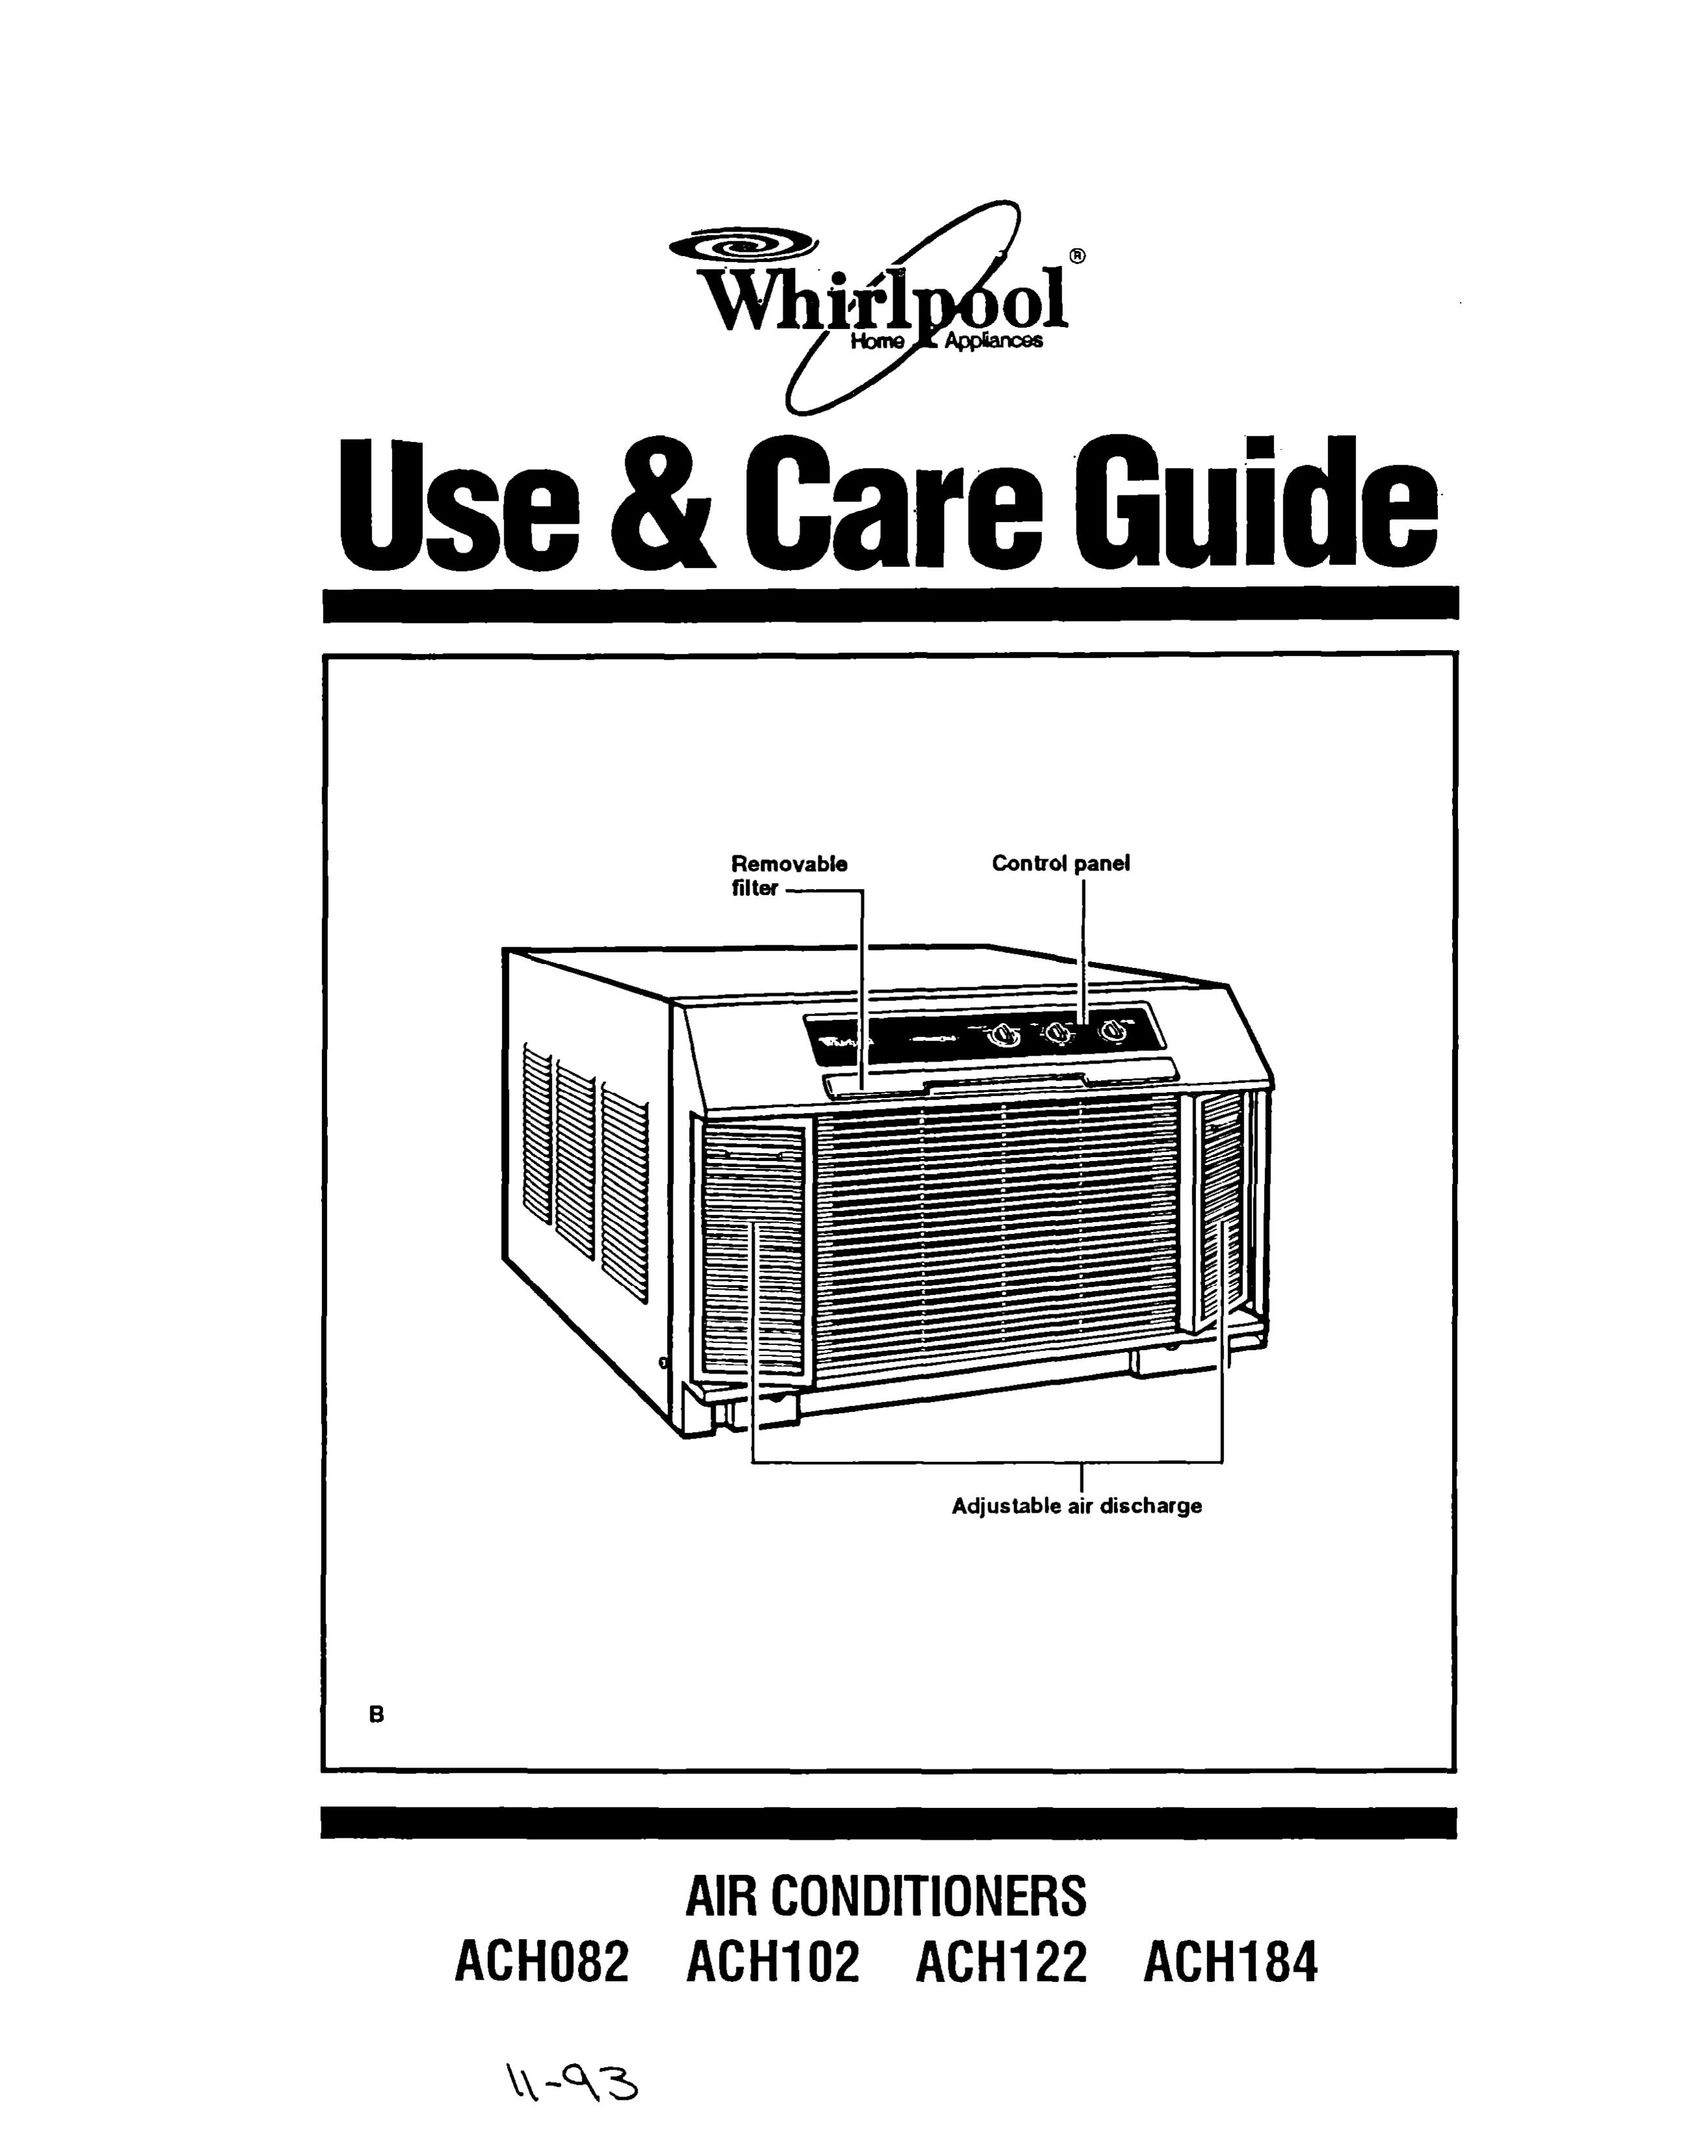 Whirlpool ACH122 Air Conditioner User Manual